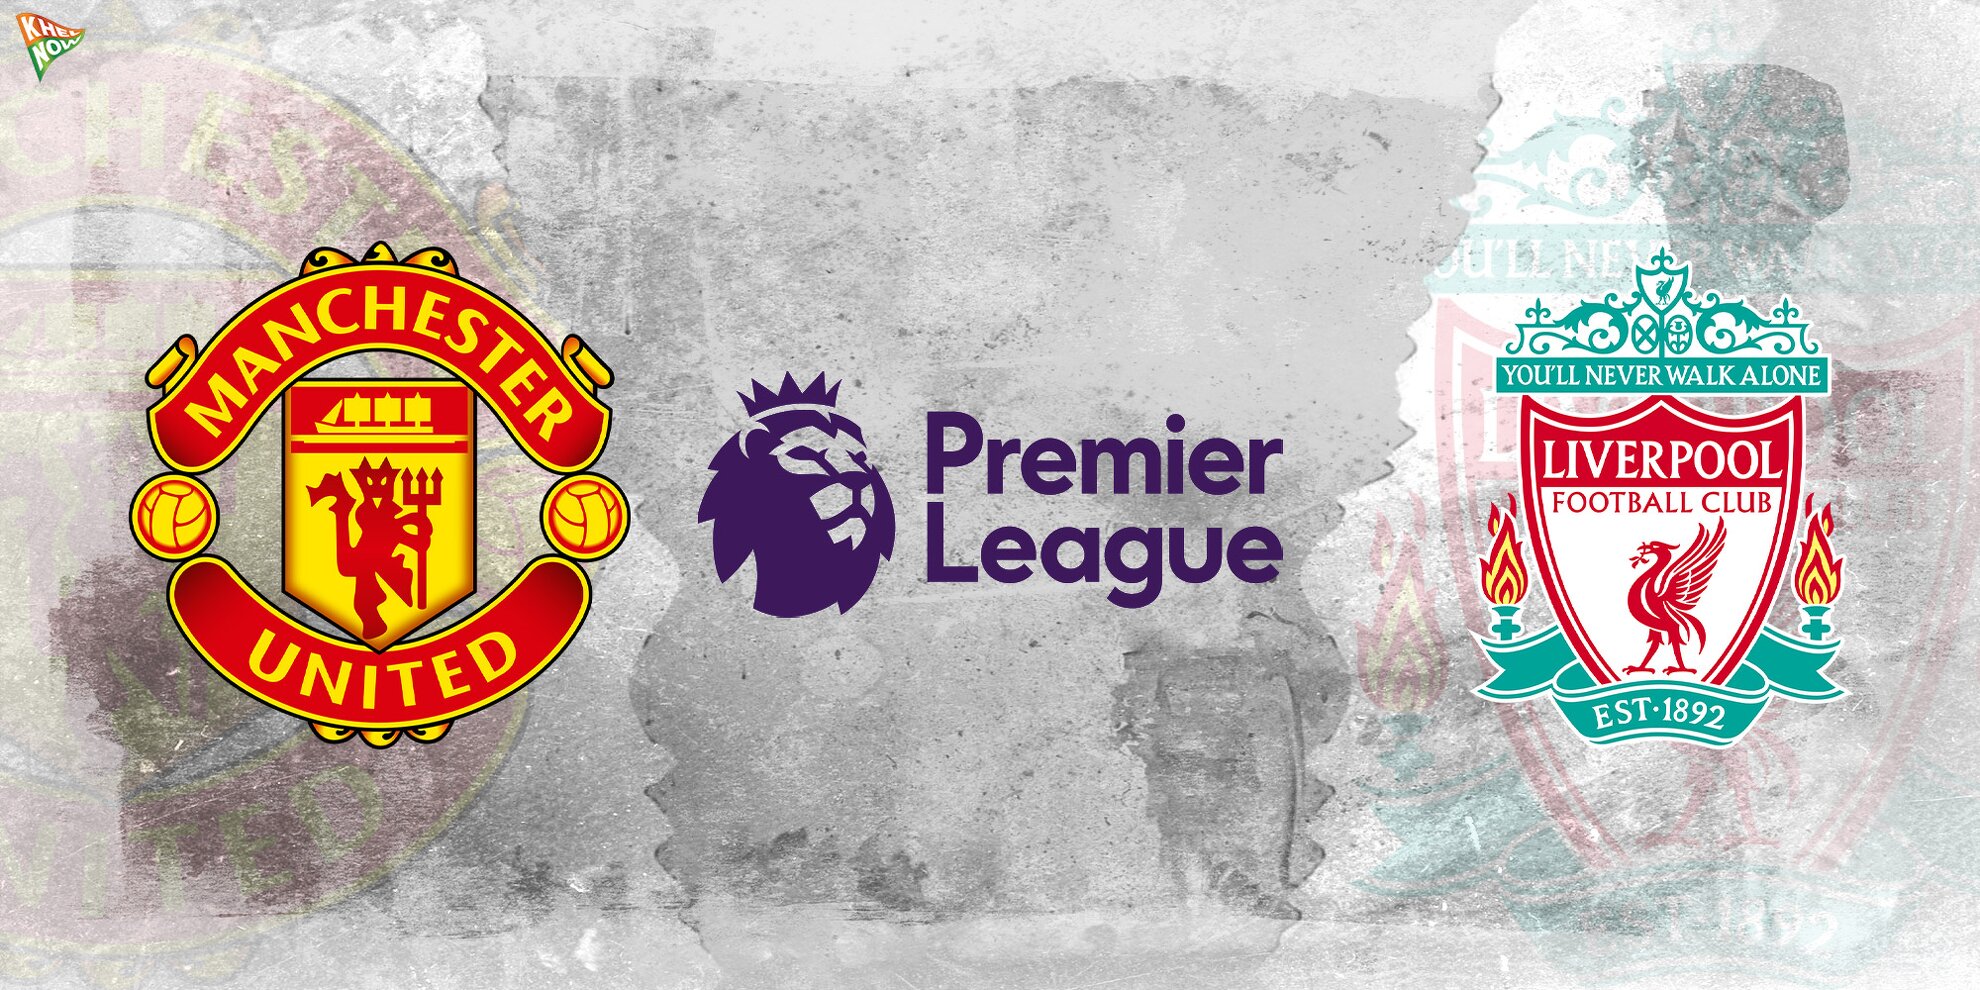 Manchester United vs Liverpool: predicted lineup, injury news, head-to-head